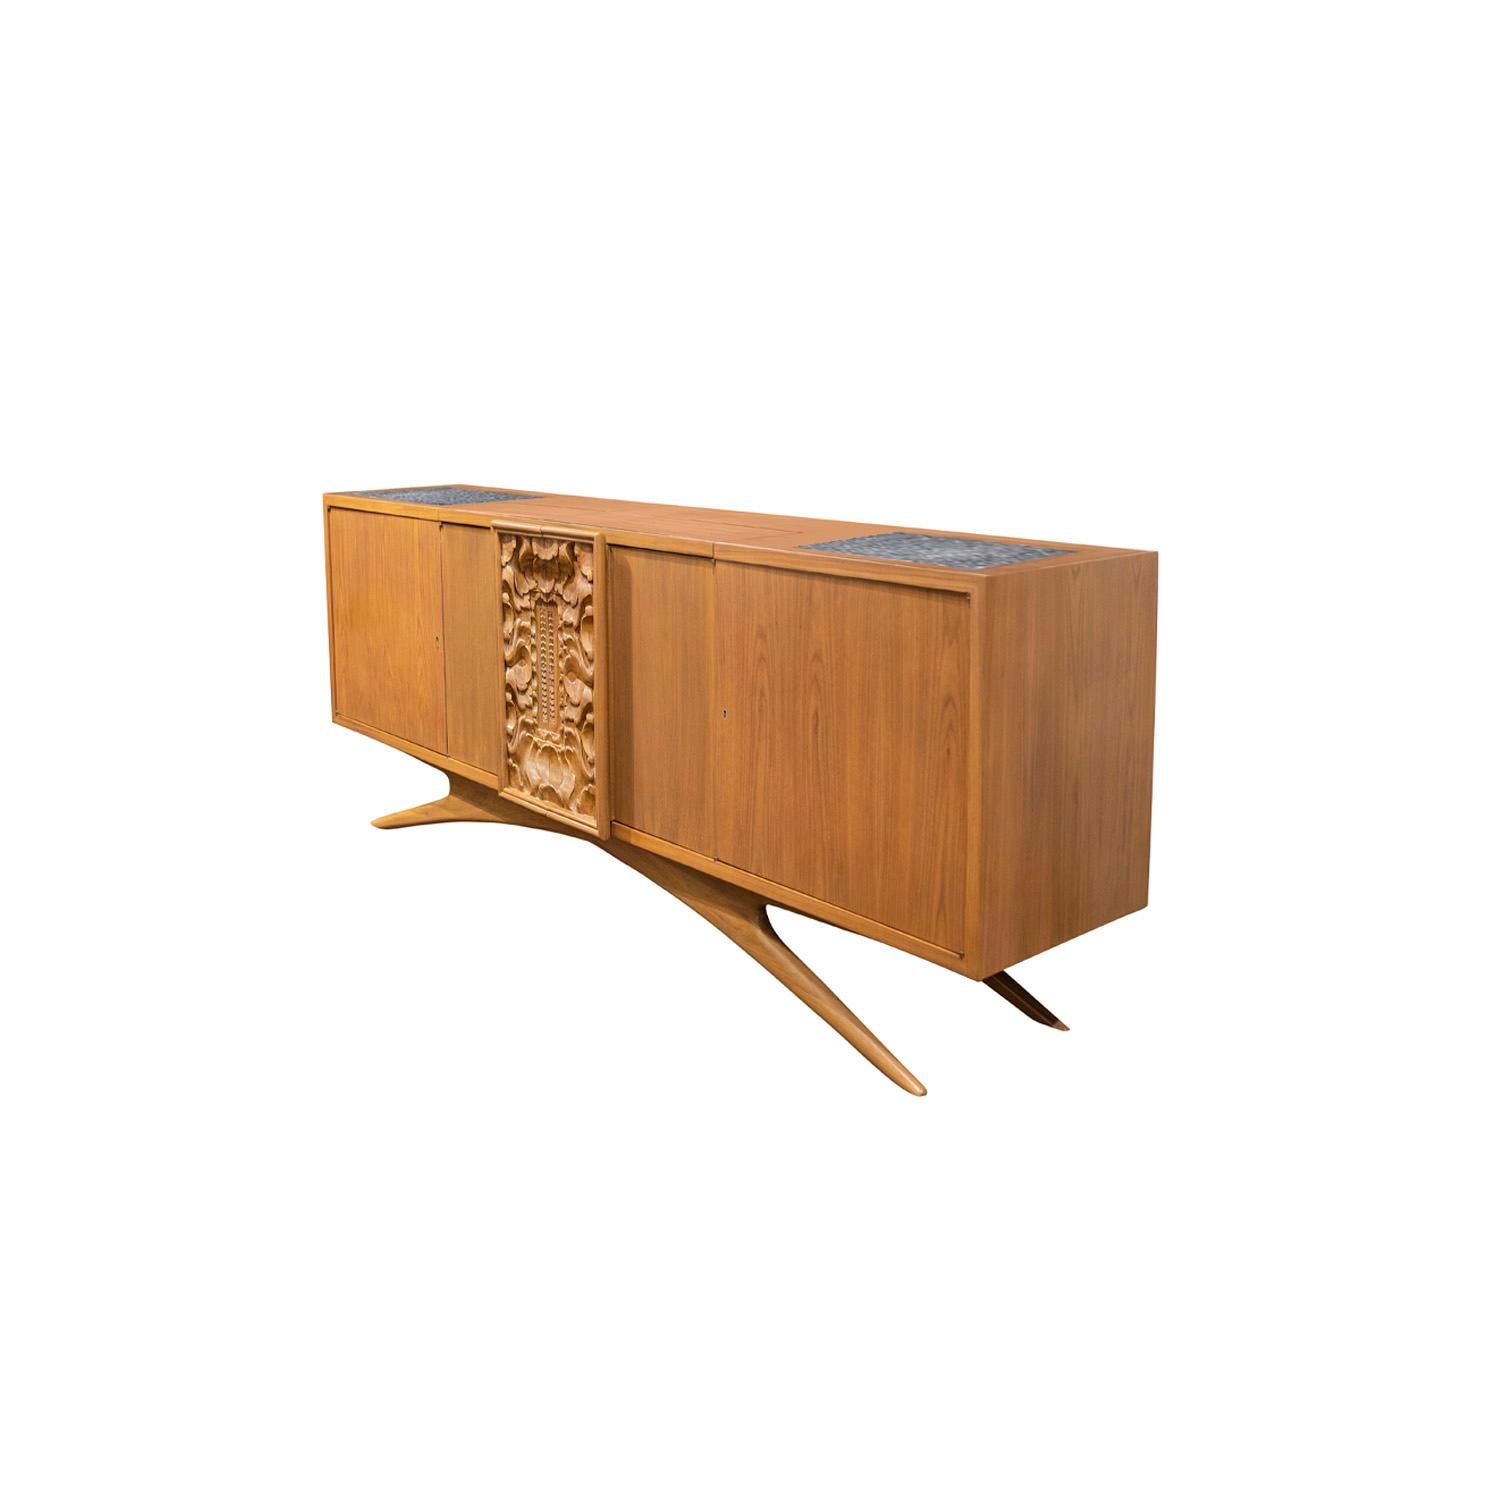 Mid-Century Modern Vladimir Kagan One-of-a-Kind Credenza with Carved Center Panels 1940s (Signed) For Sale